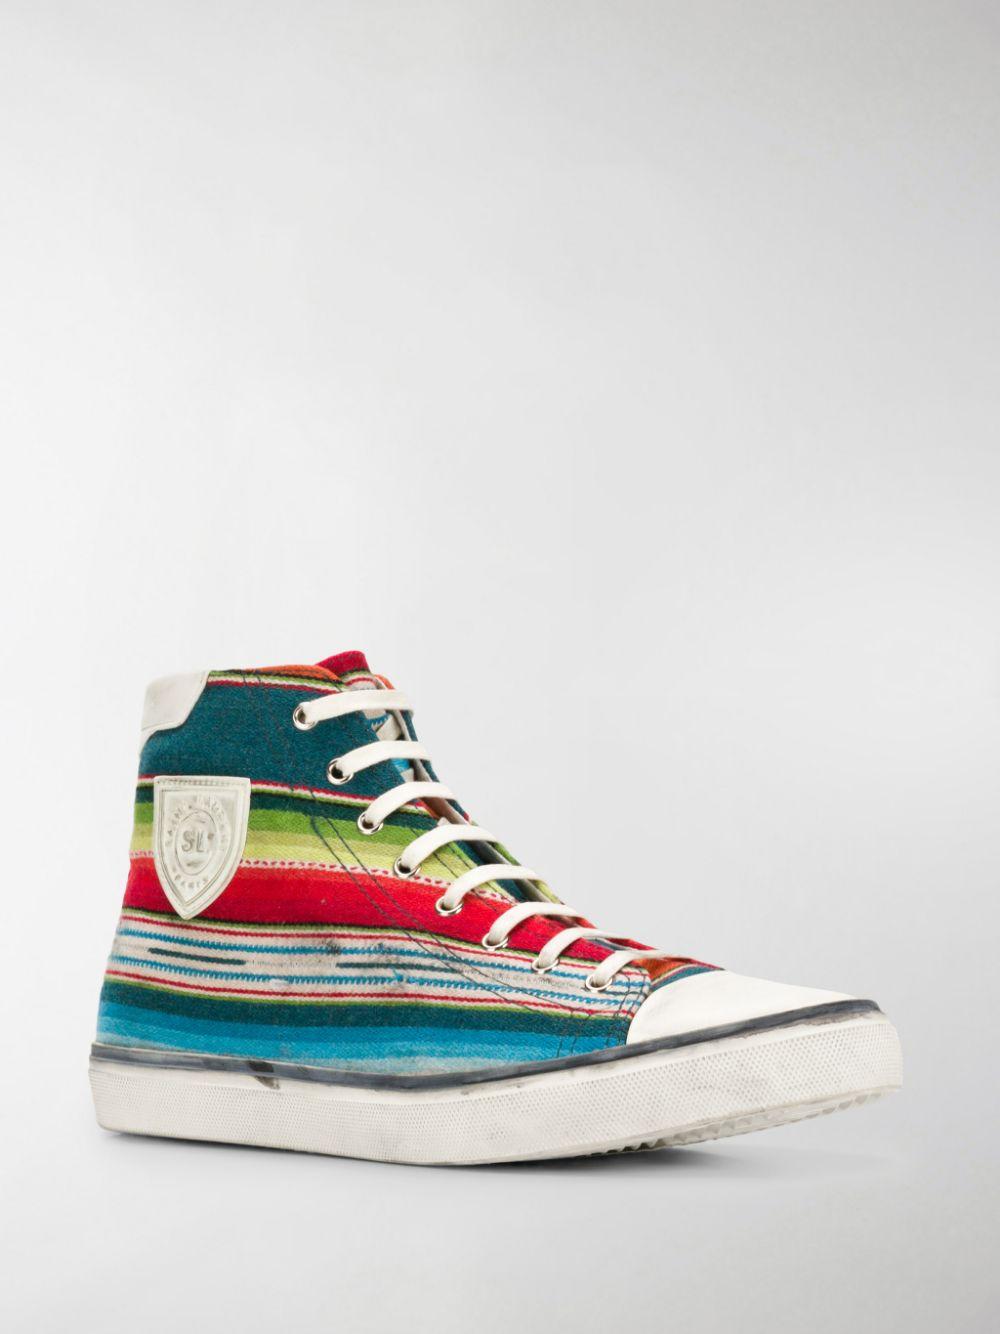 Saint Laurent Mens 'Mexican Jacquard' Bedford High Top Sneakers

These multicoloured Saint Laurent Beford striped cotton high top sneakers feature a round toe, lace-up front, multicolored stripes, a logo patch at the side and a distressed rubber